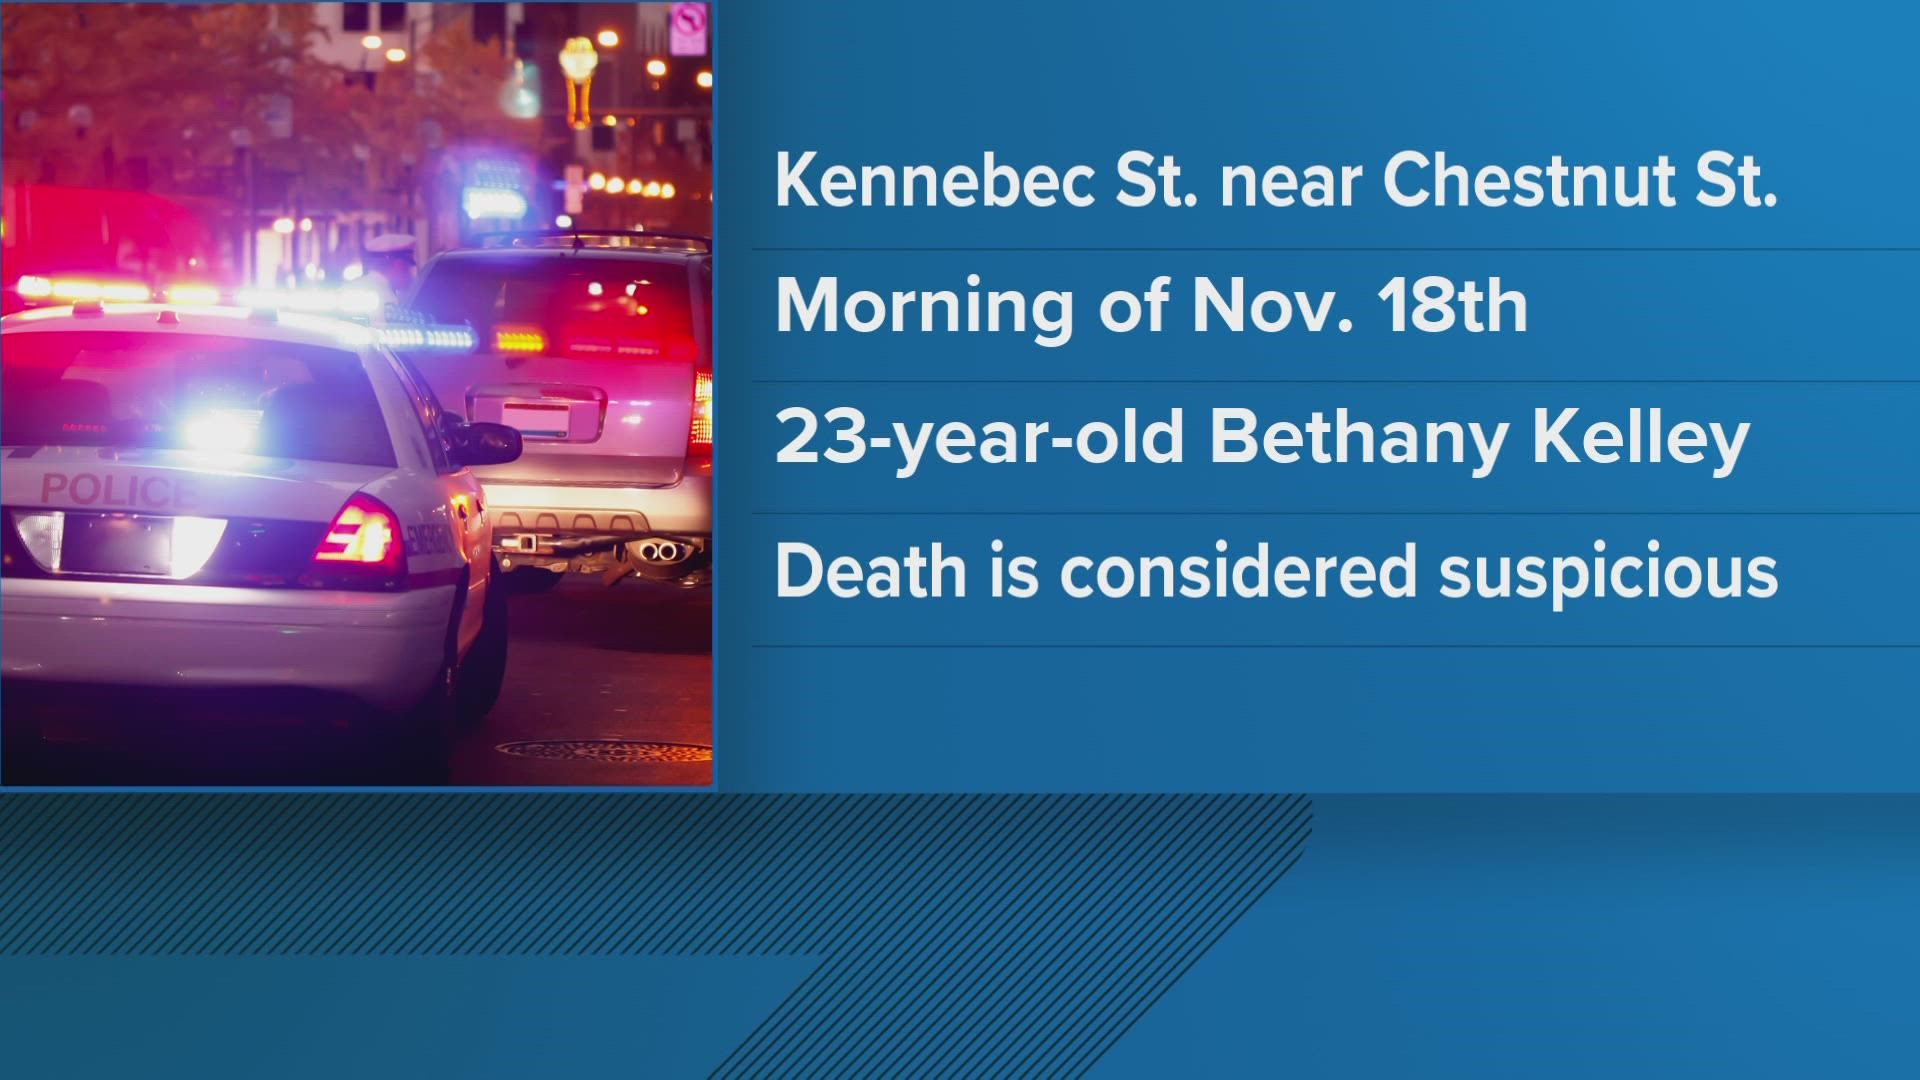 Bethany Kelley, an unhoused Portland woman, was found dead on Kennebec Street the morning of Nov. 18.